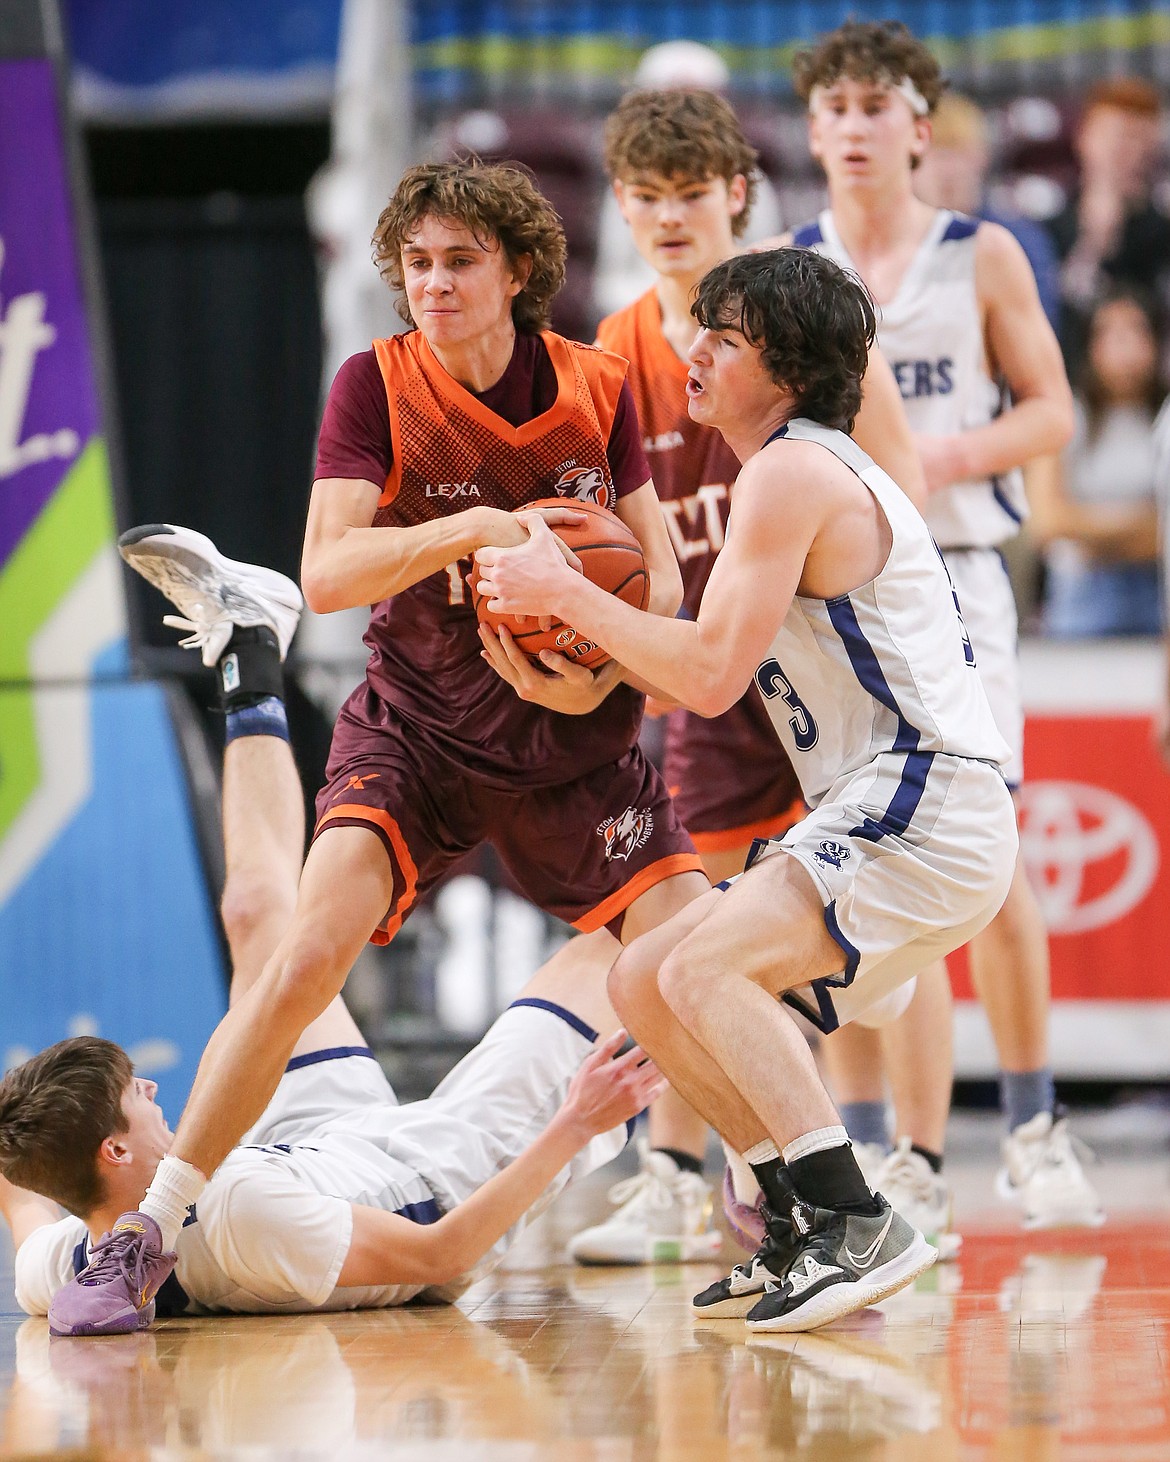 Eli Blackmore gets a jump ball for the Bonners Ferry in the fourth quarter of the 3A State Championship against Teton on March 2.